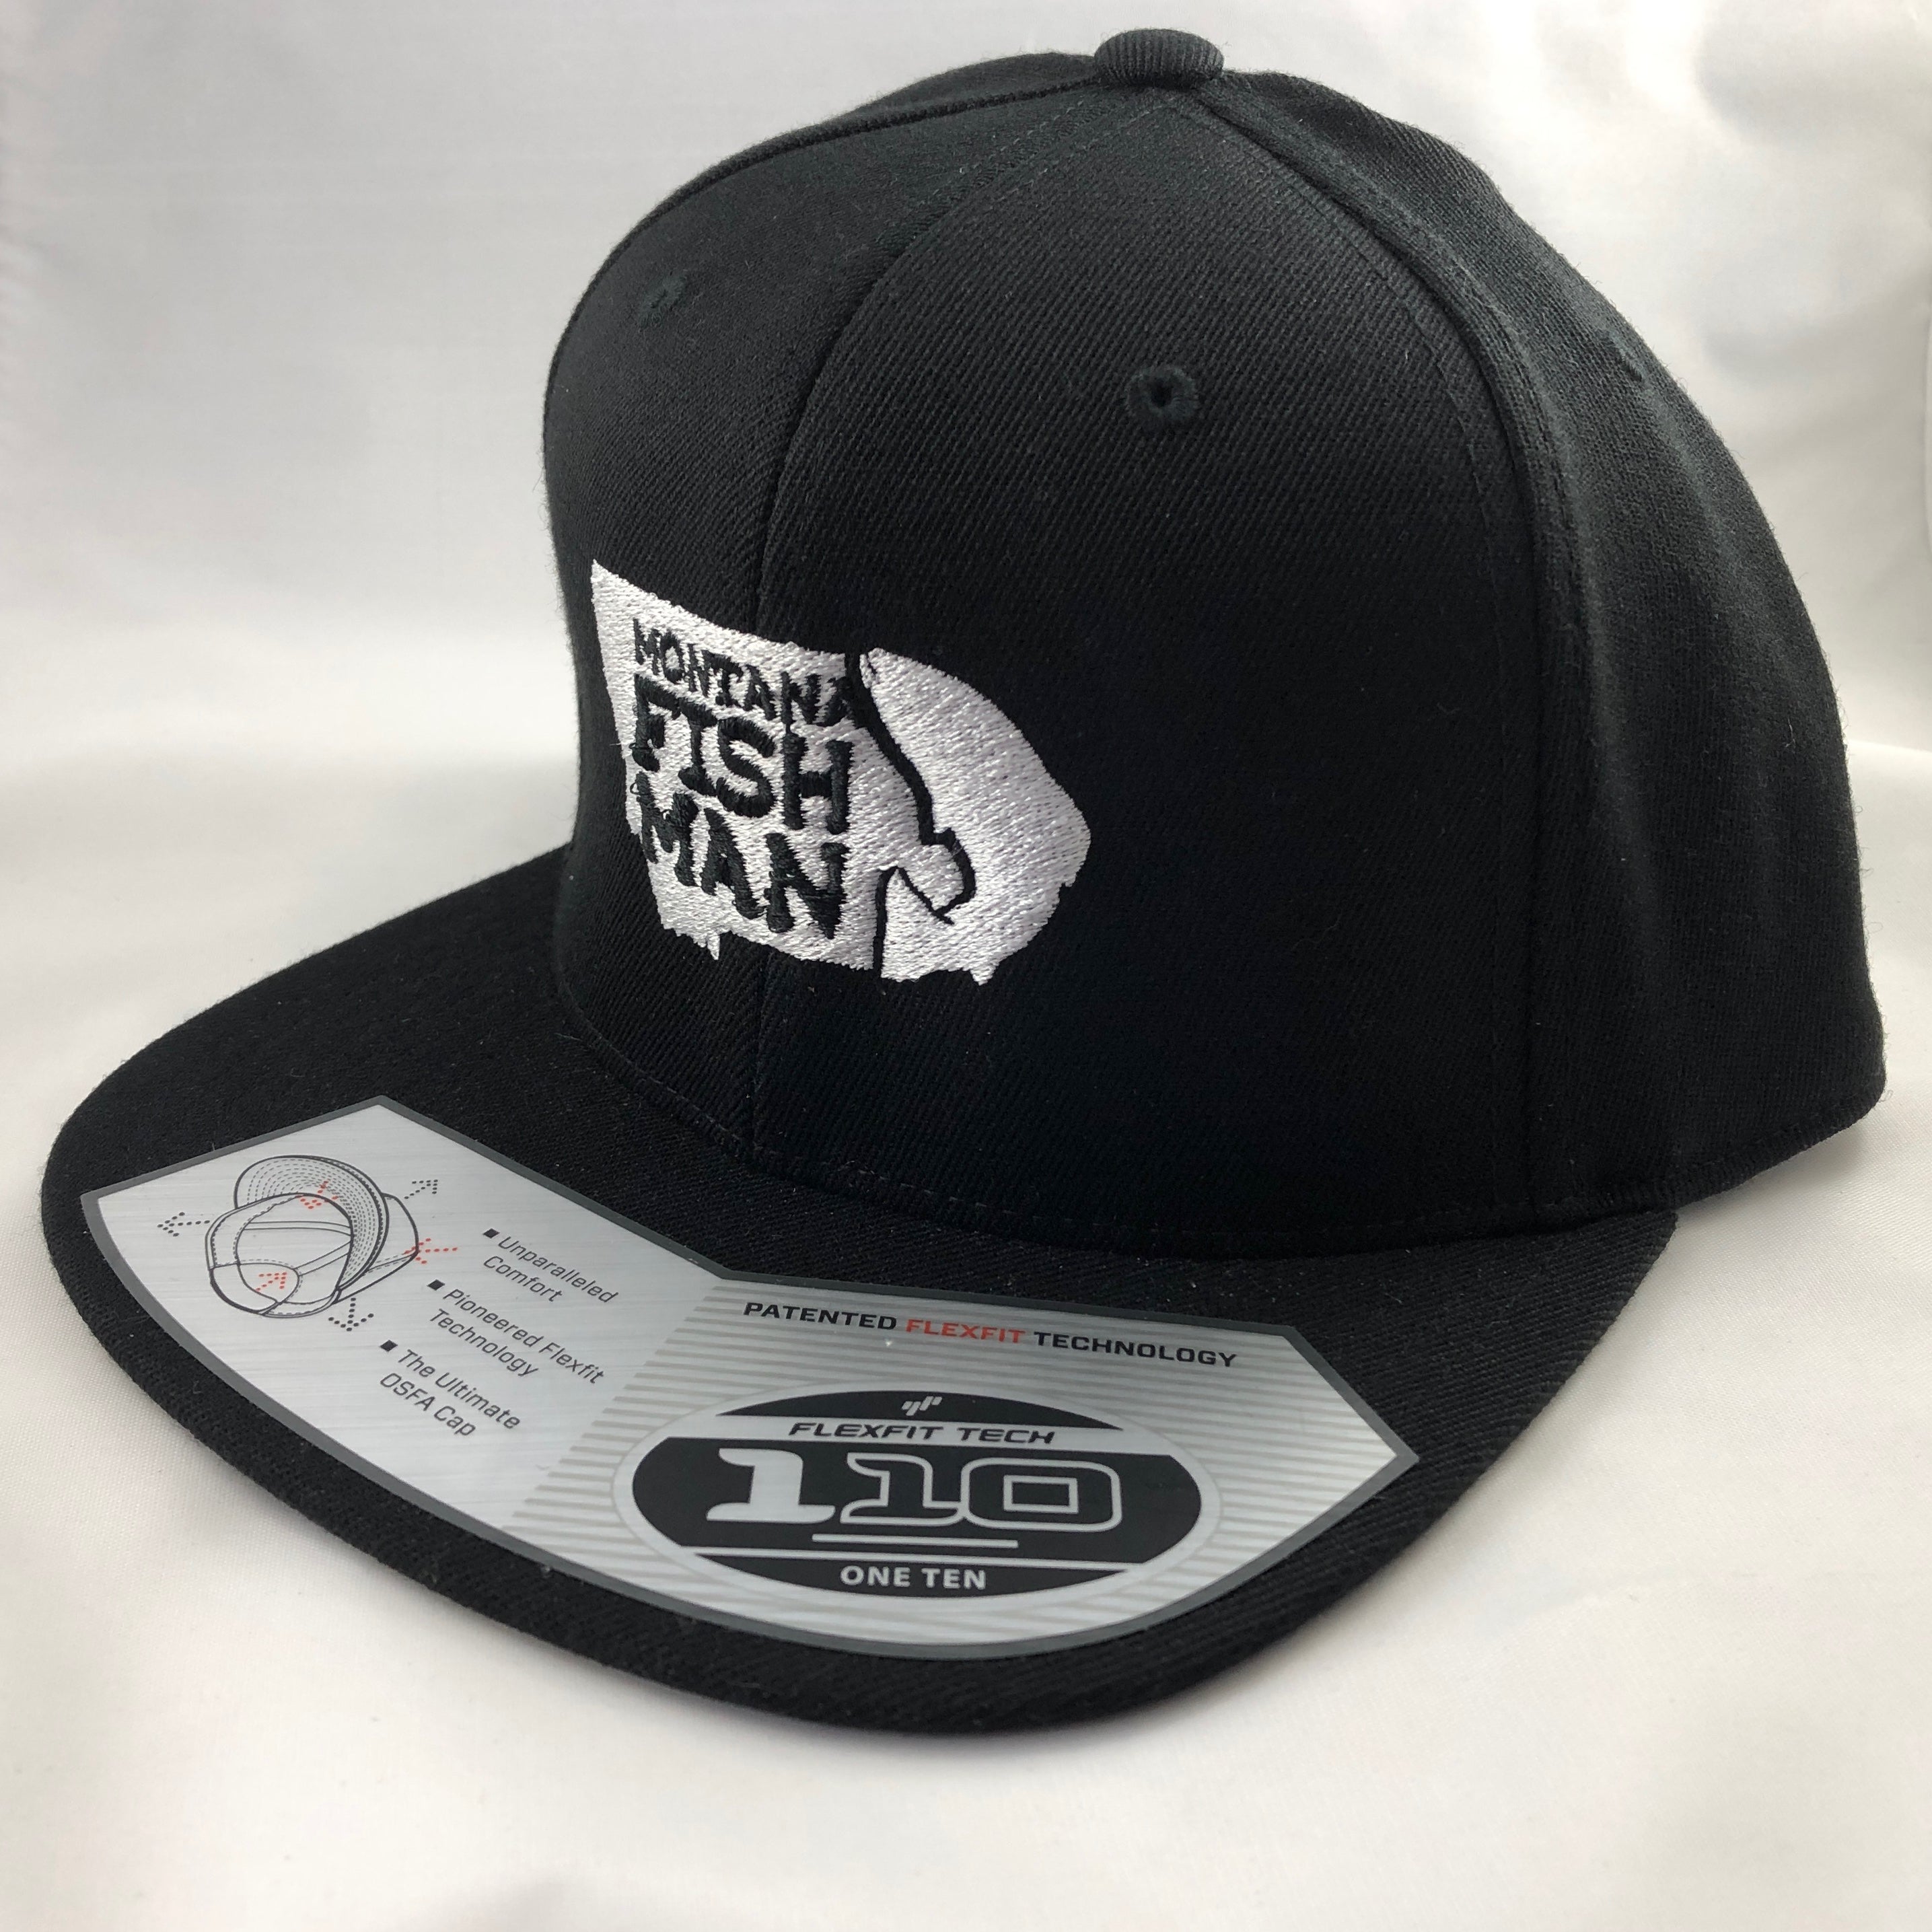  13 Fishing Men's One Size Classic Curved Brim Flex Fit  Ballcap-HCB10, Black/White : Clothing, Shoes & Jewelry